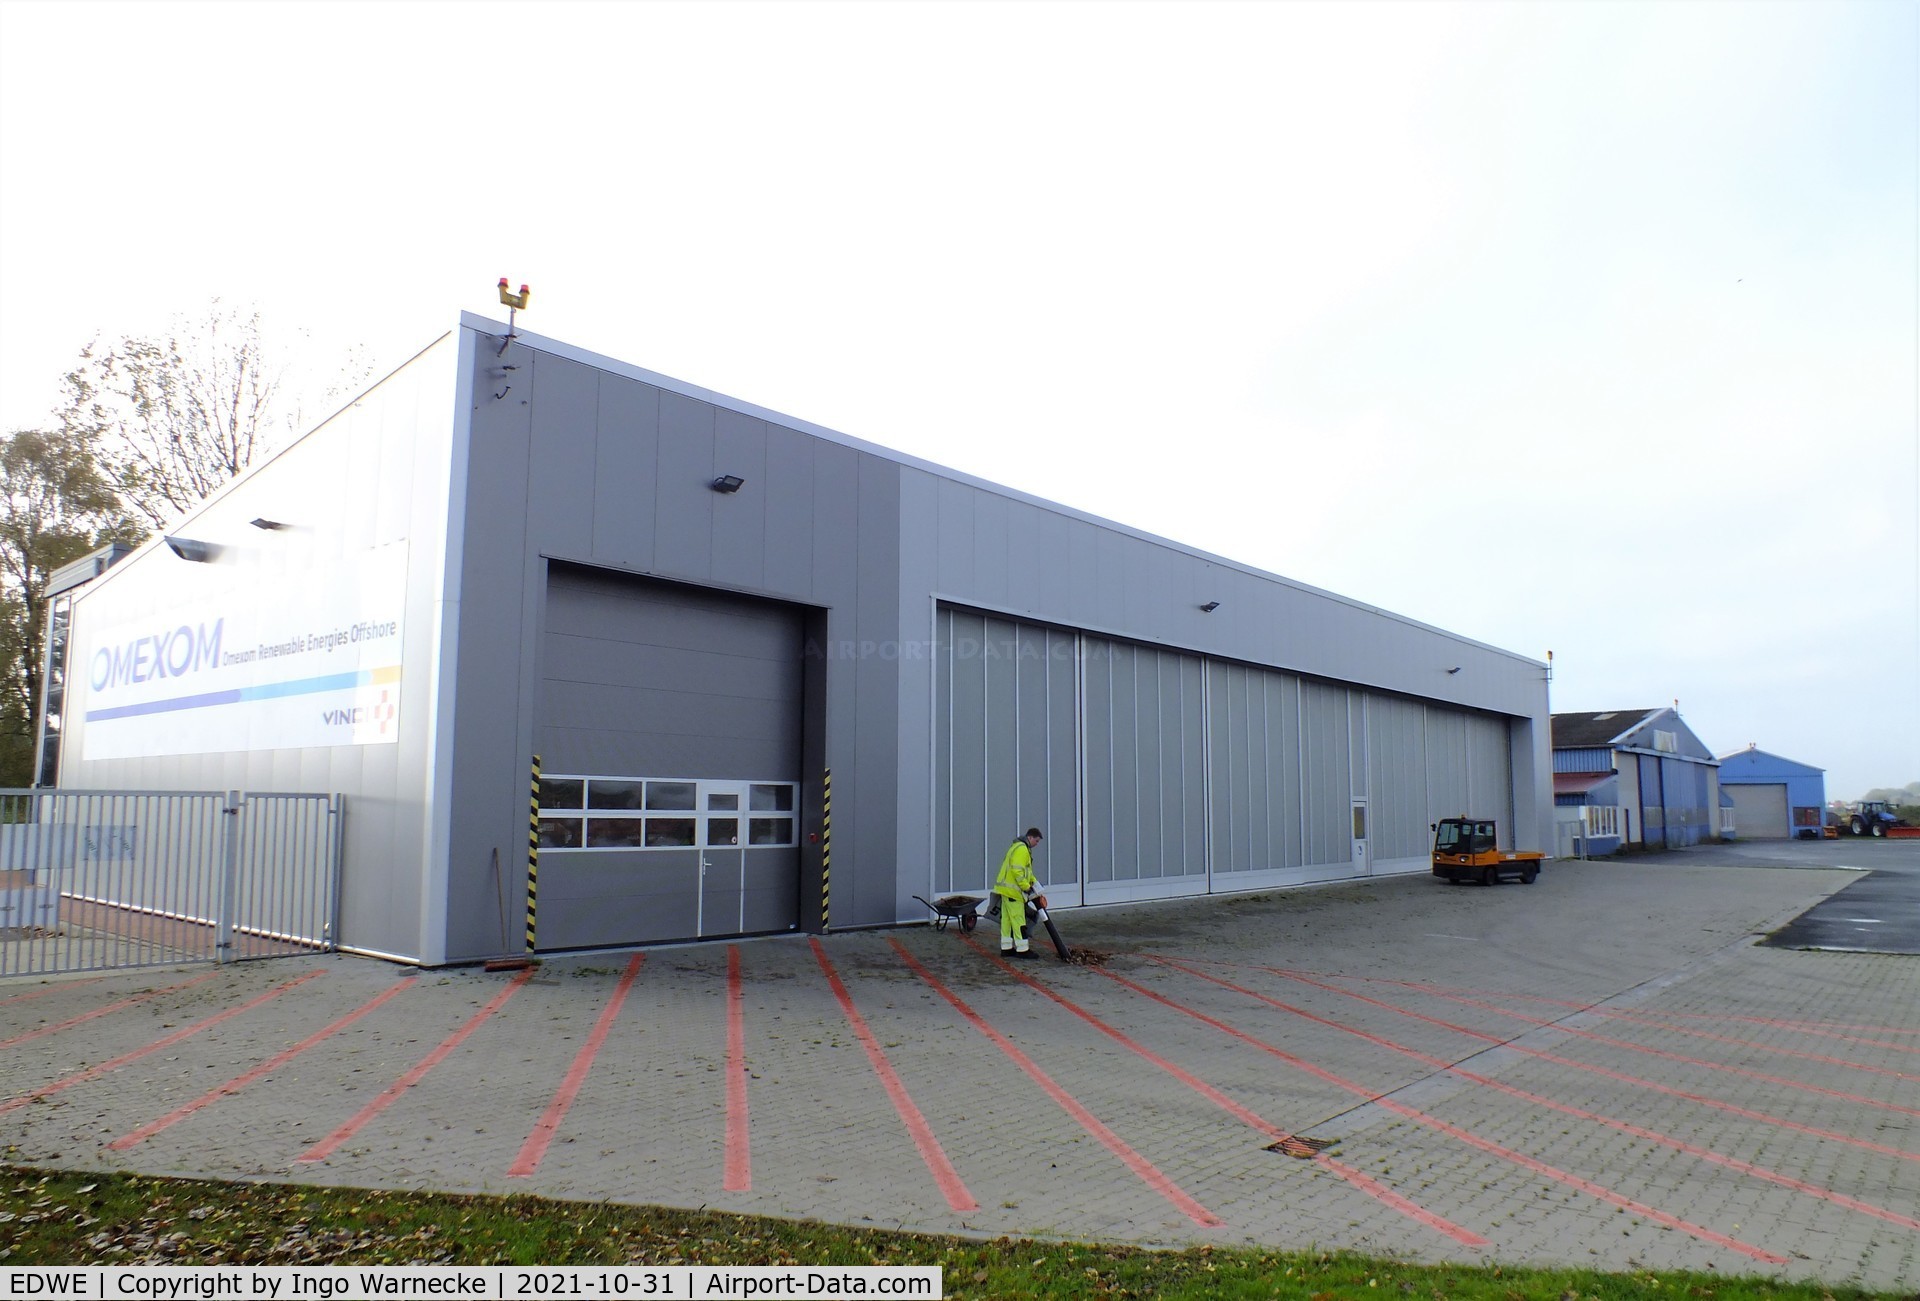 EDWE Airport - hangar west of the tower at Emden airfield